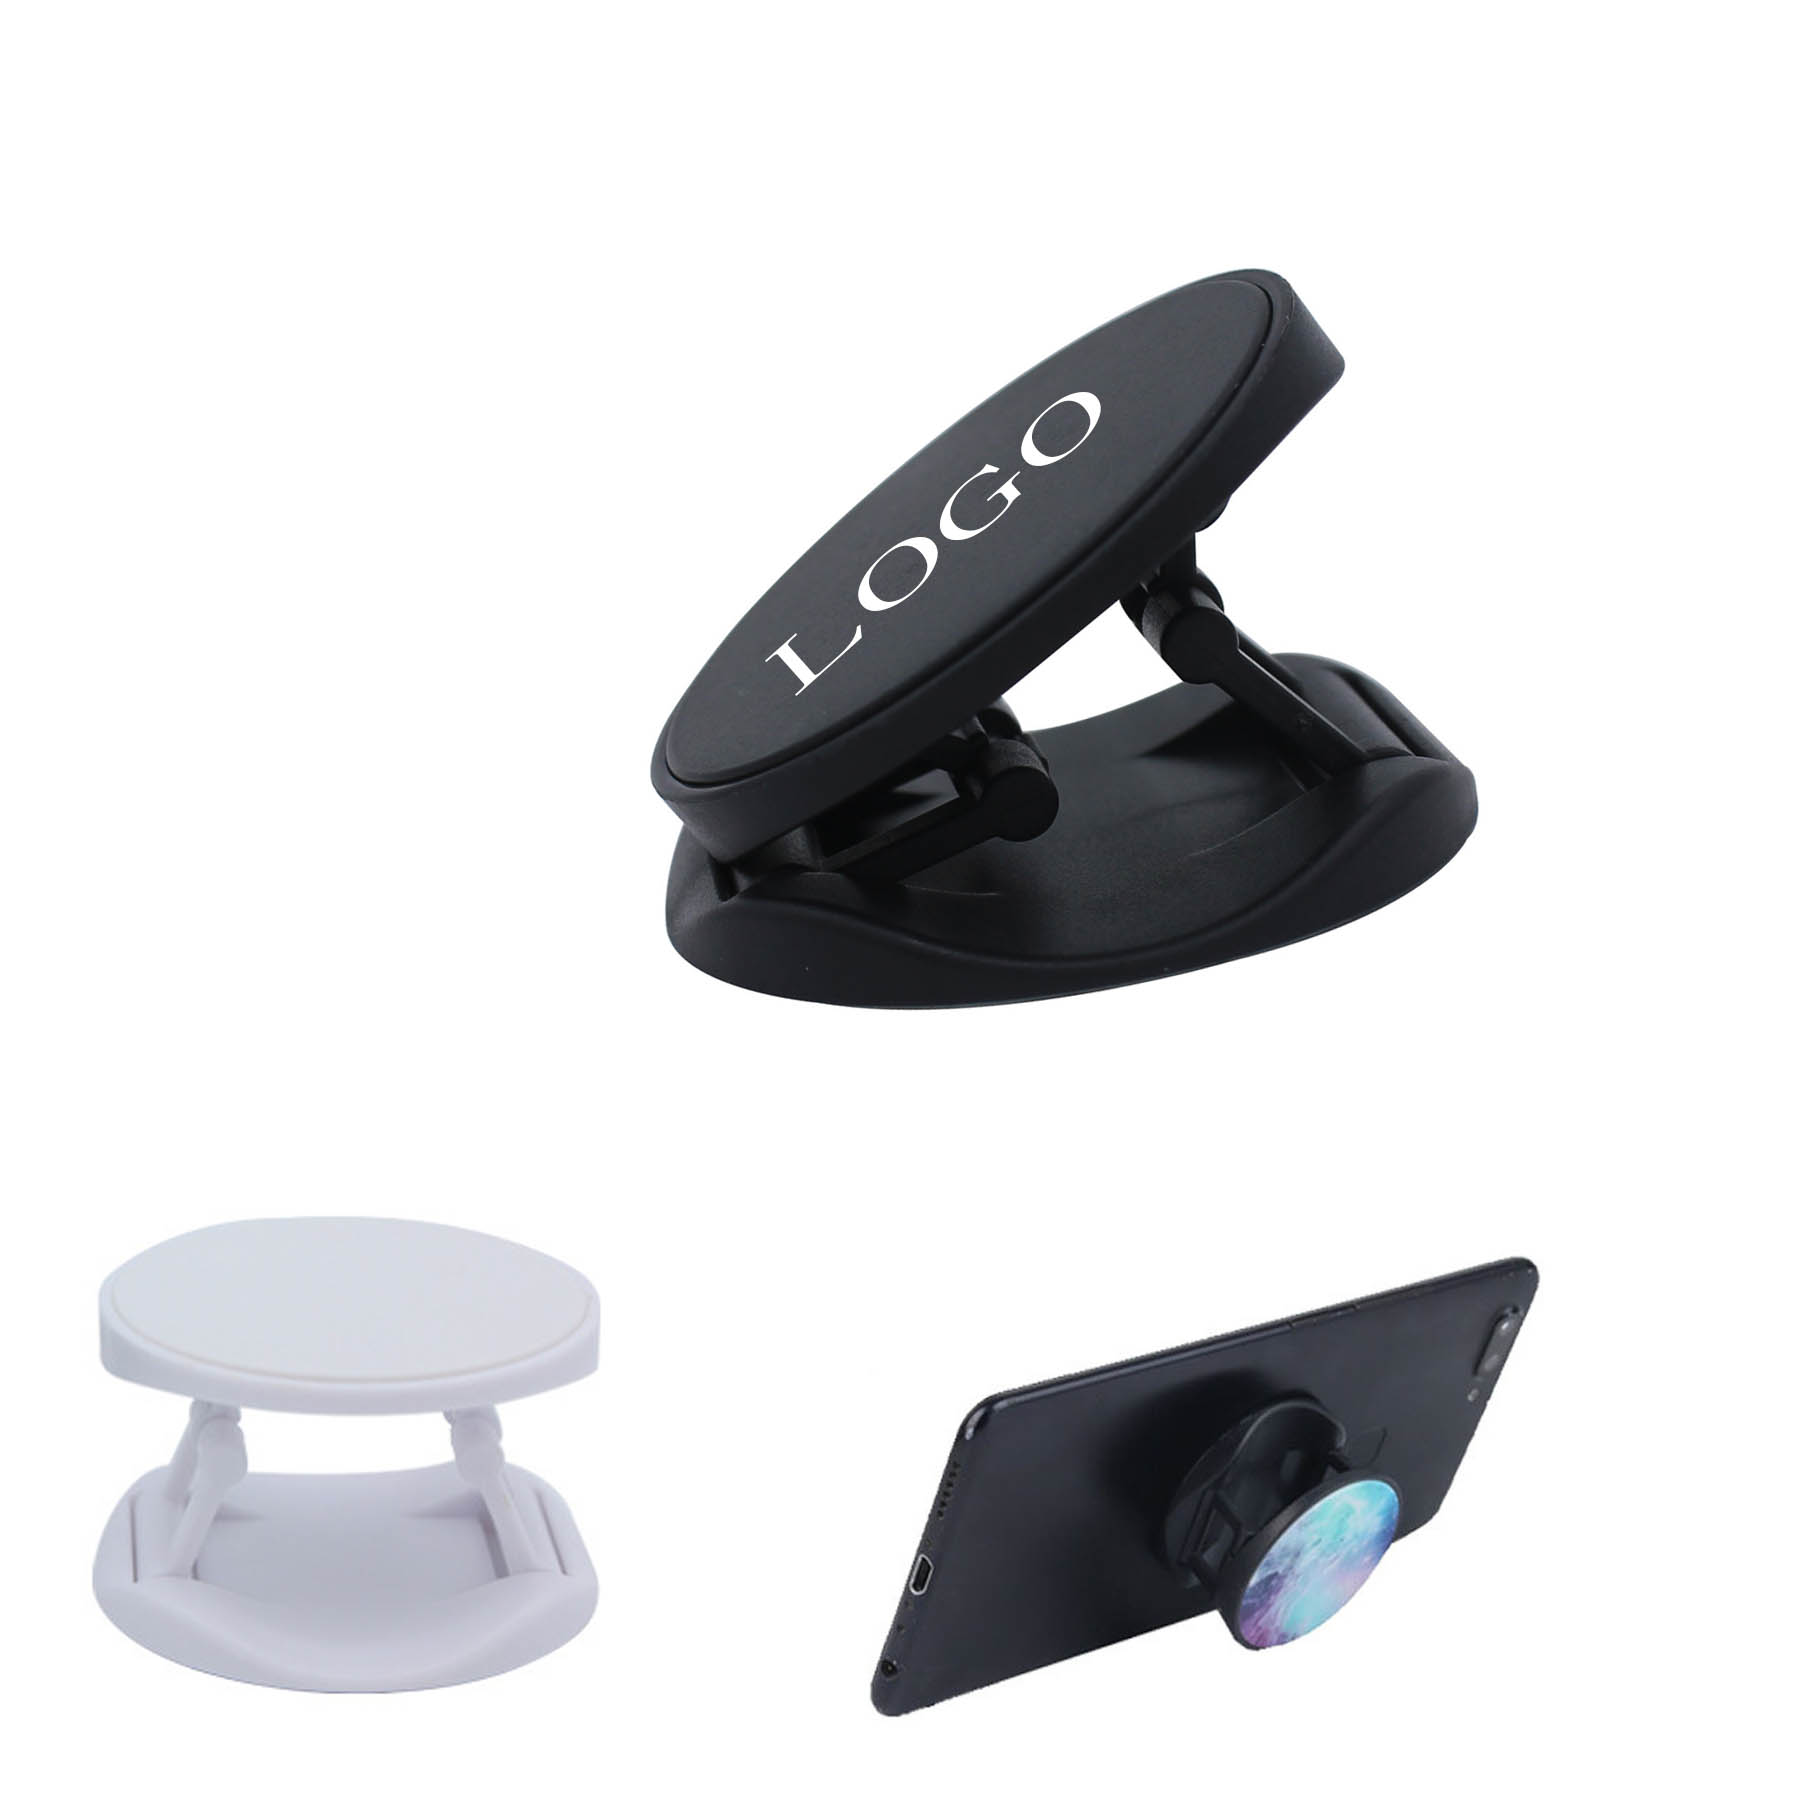 ABS Collapsible Phone Grip & Stand